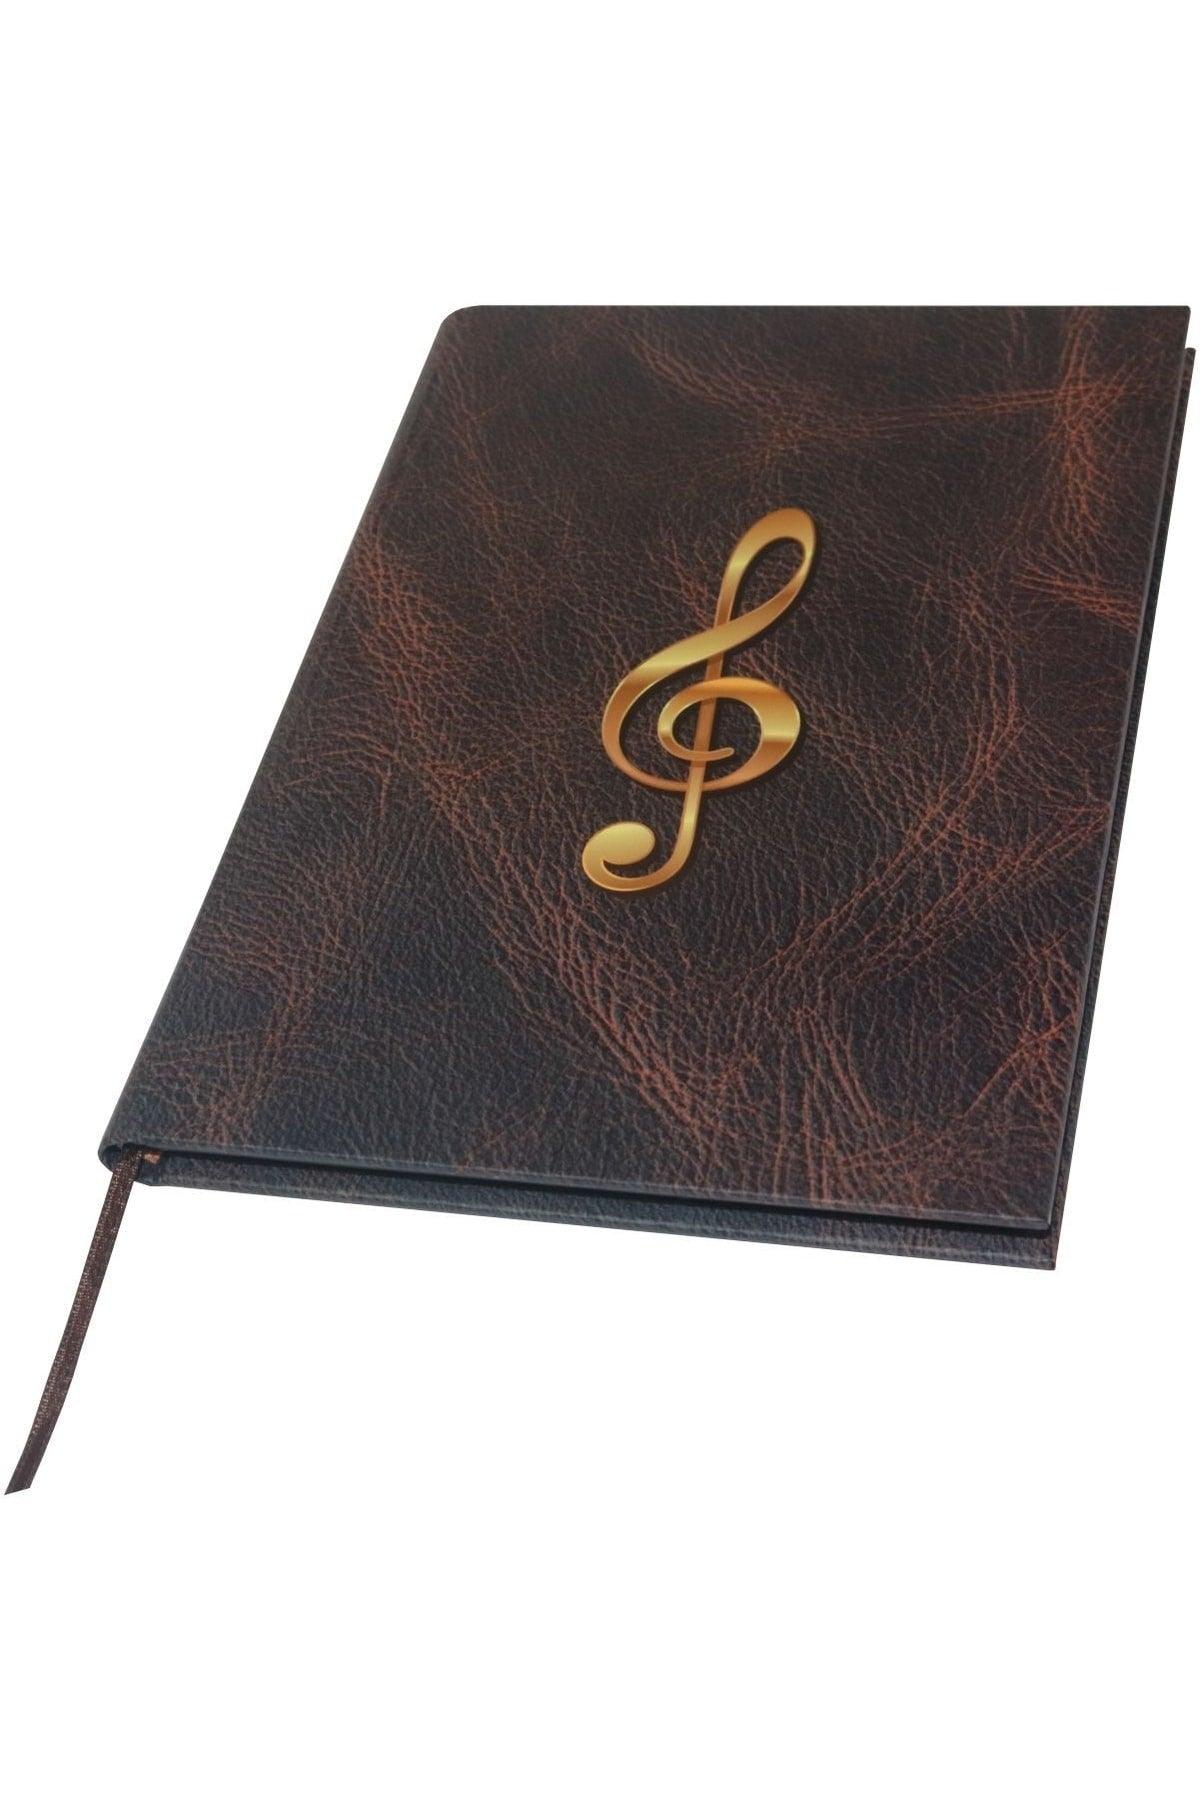 Music Notebook (with Left Key) - Special Hand